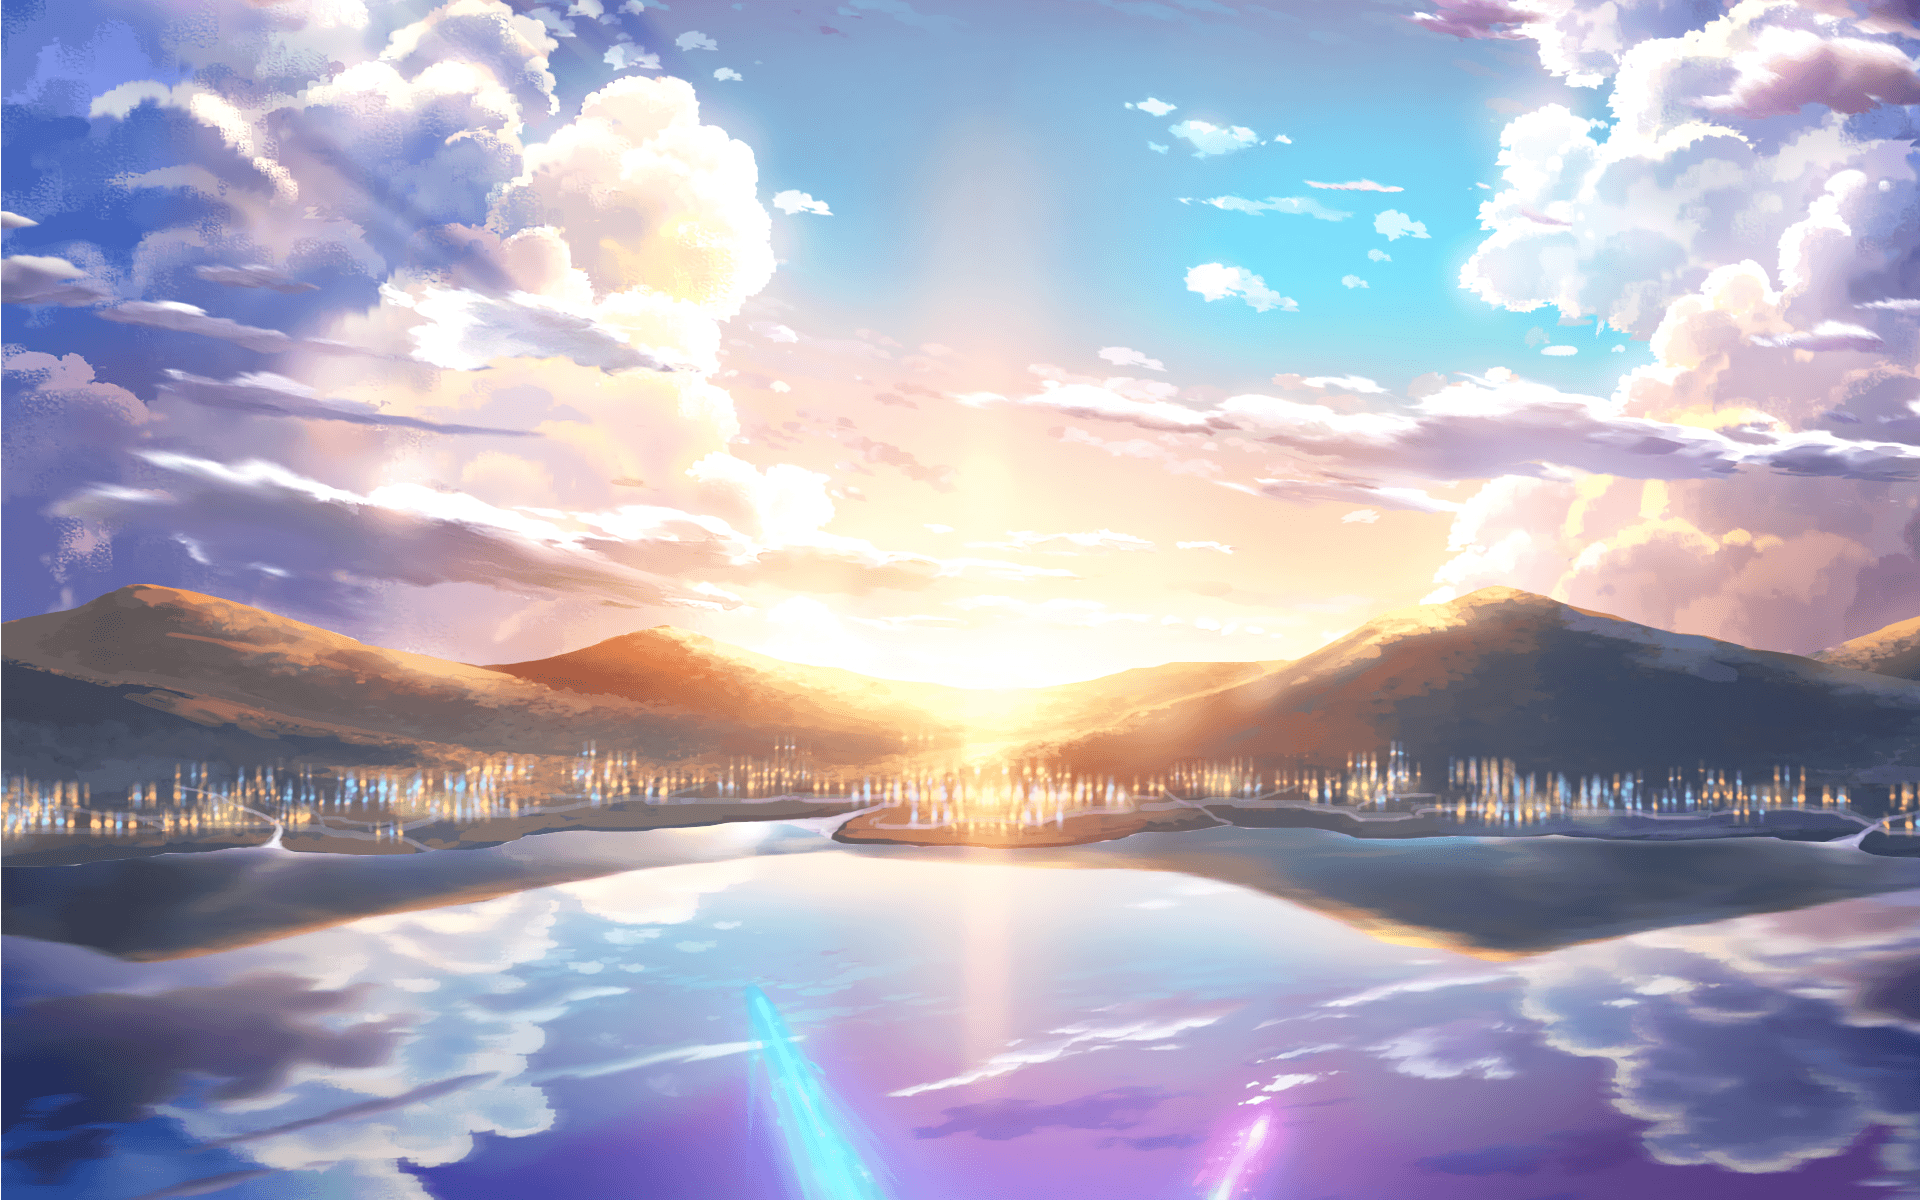 Your Name Anime Landscape Wallpapers - Top Free Your Name Anime